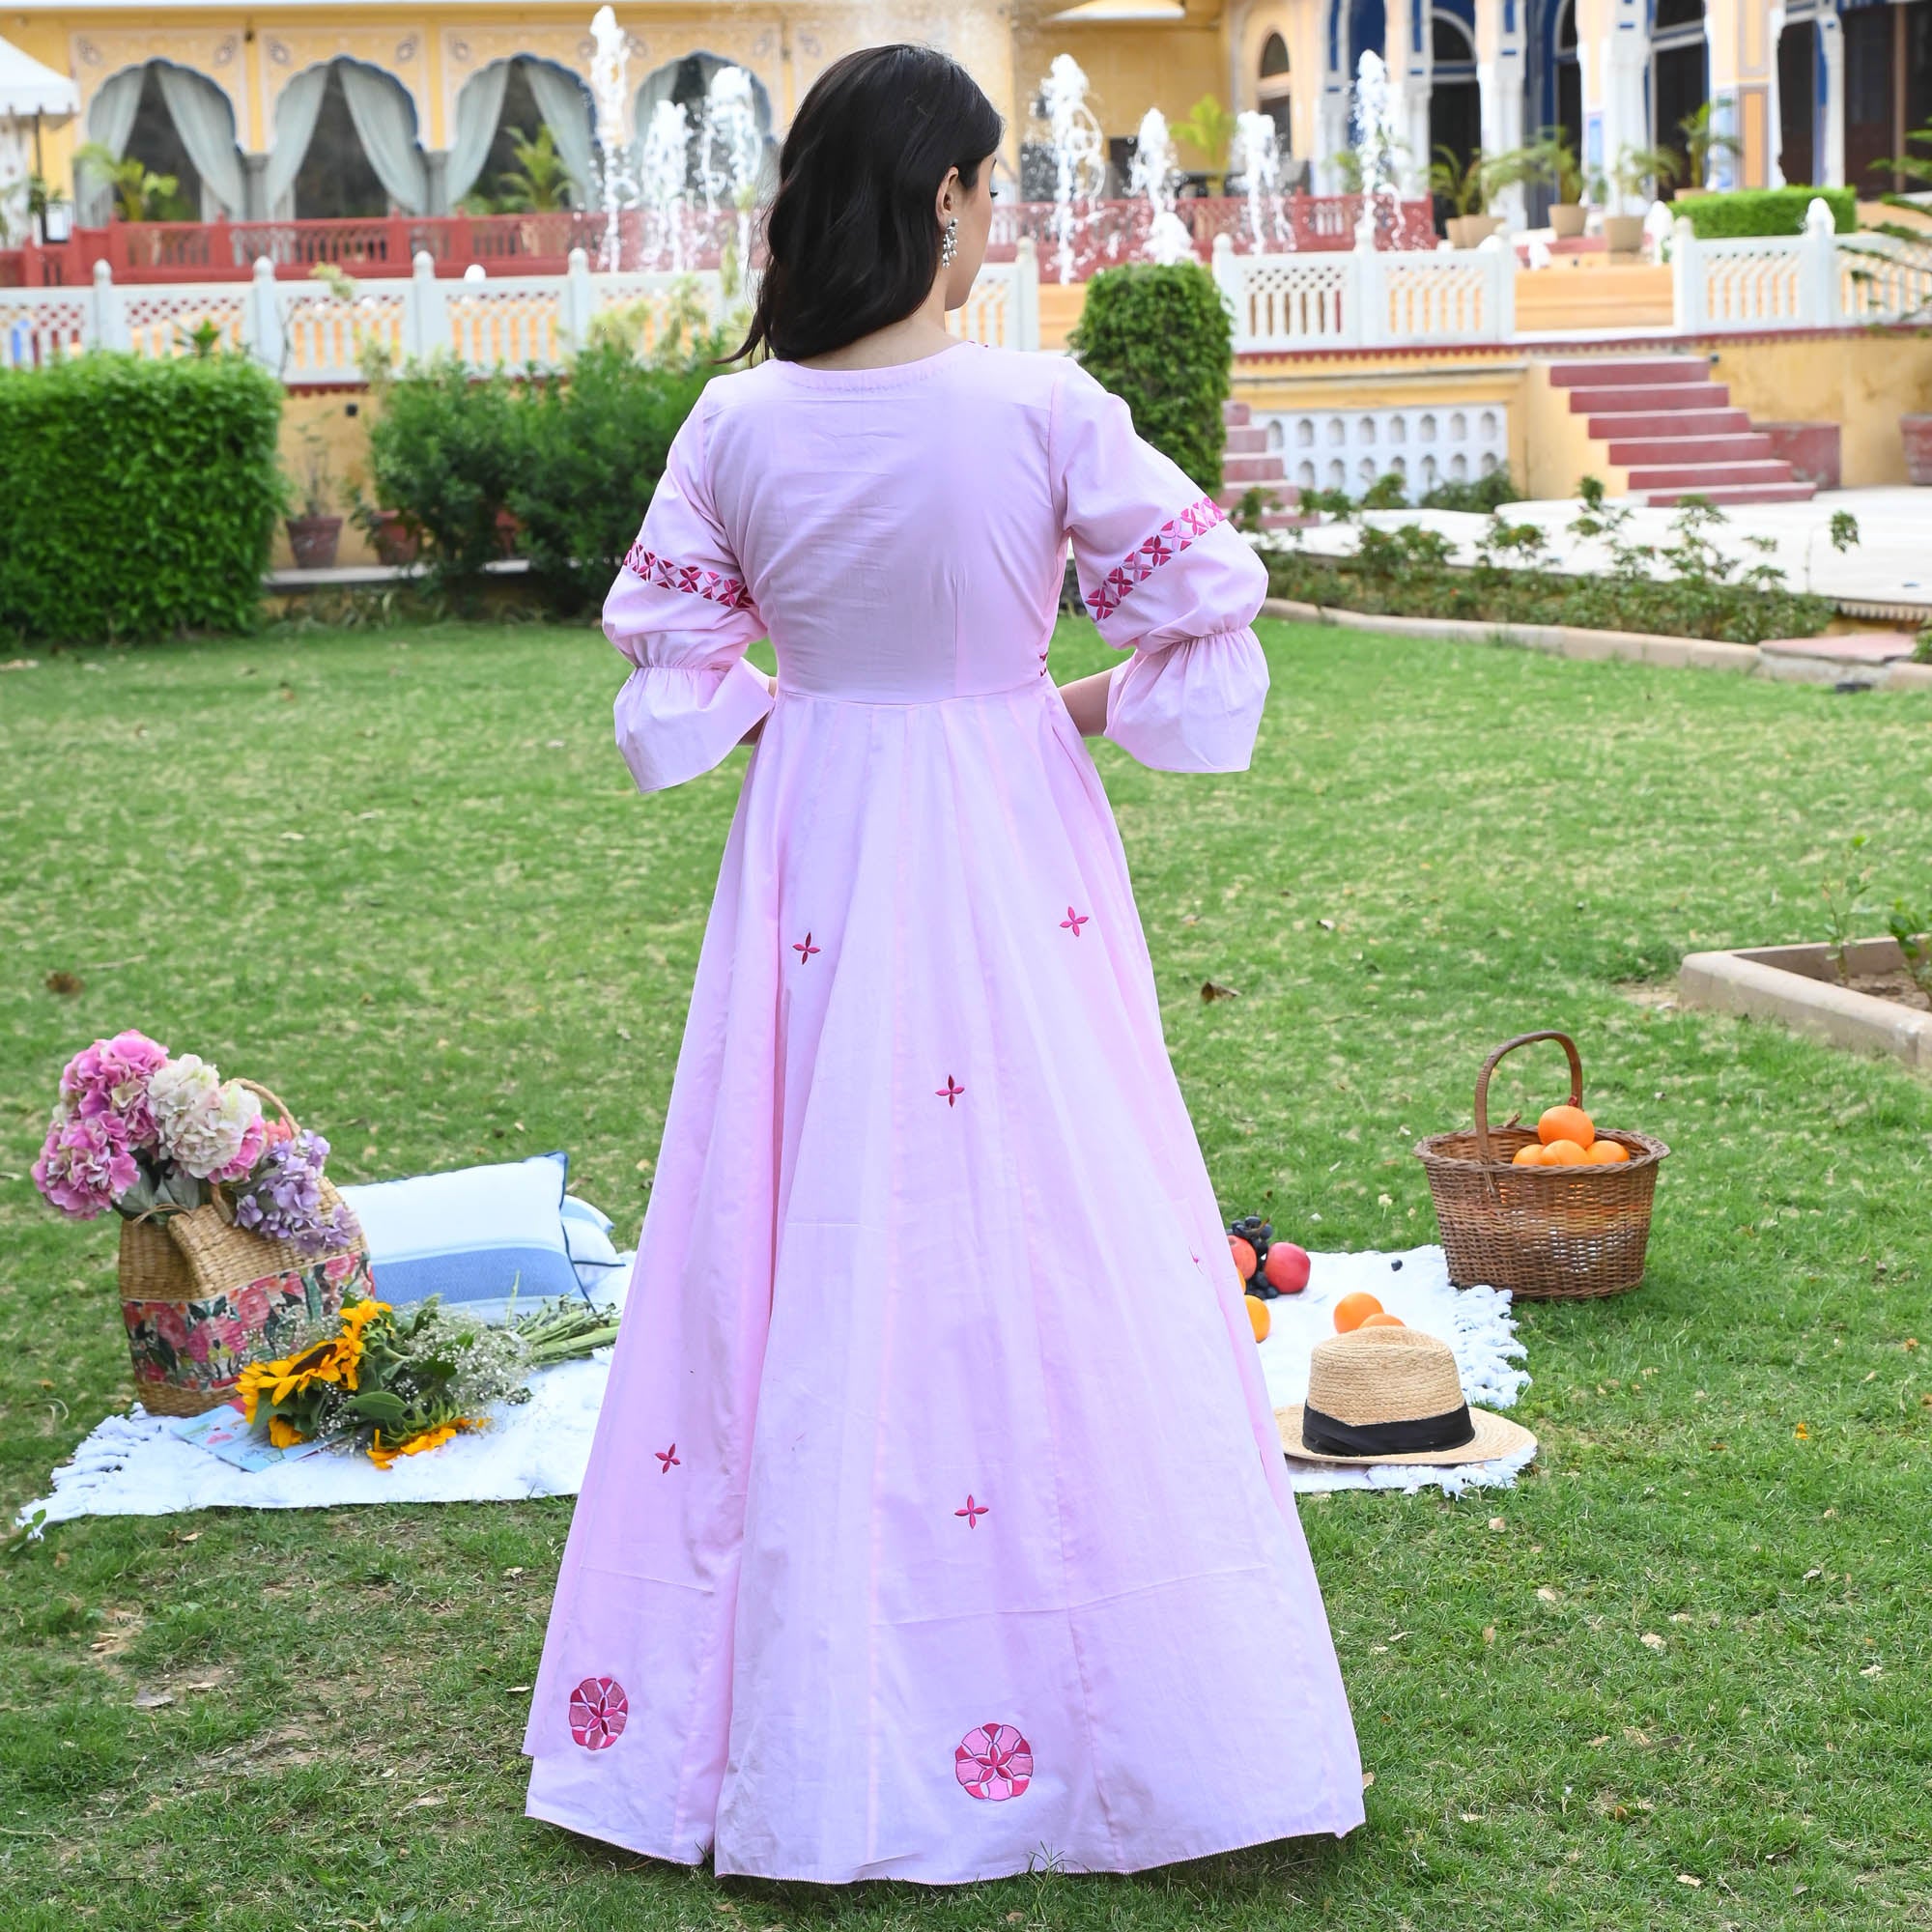 Cotton Pink Ethnic Dress for Women Online